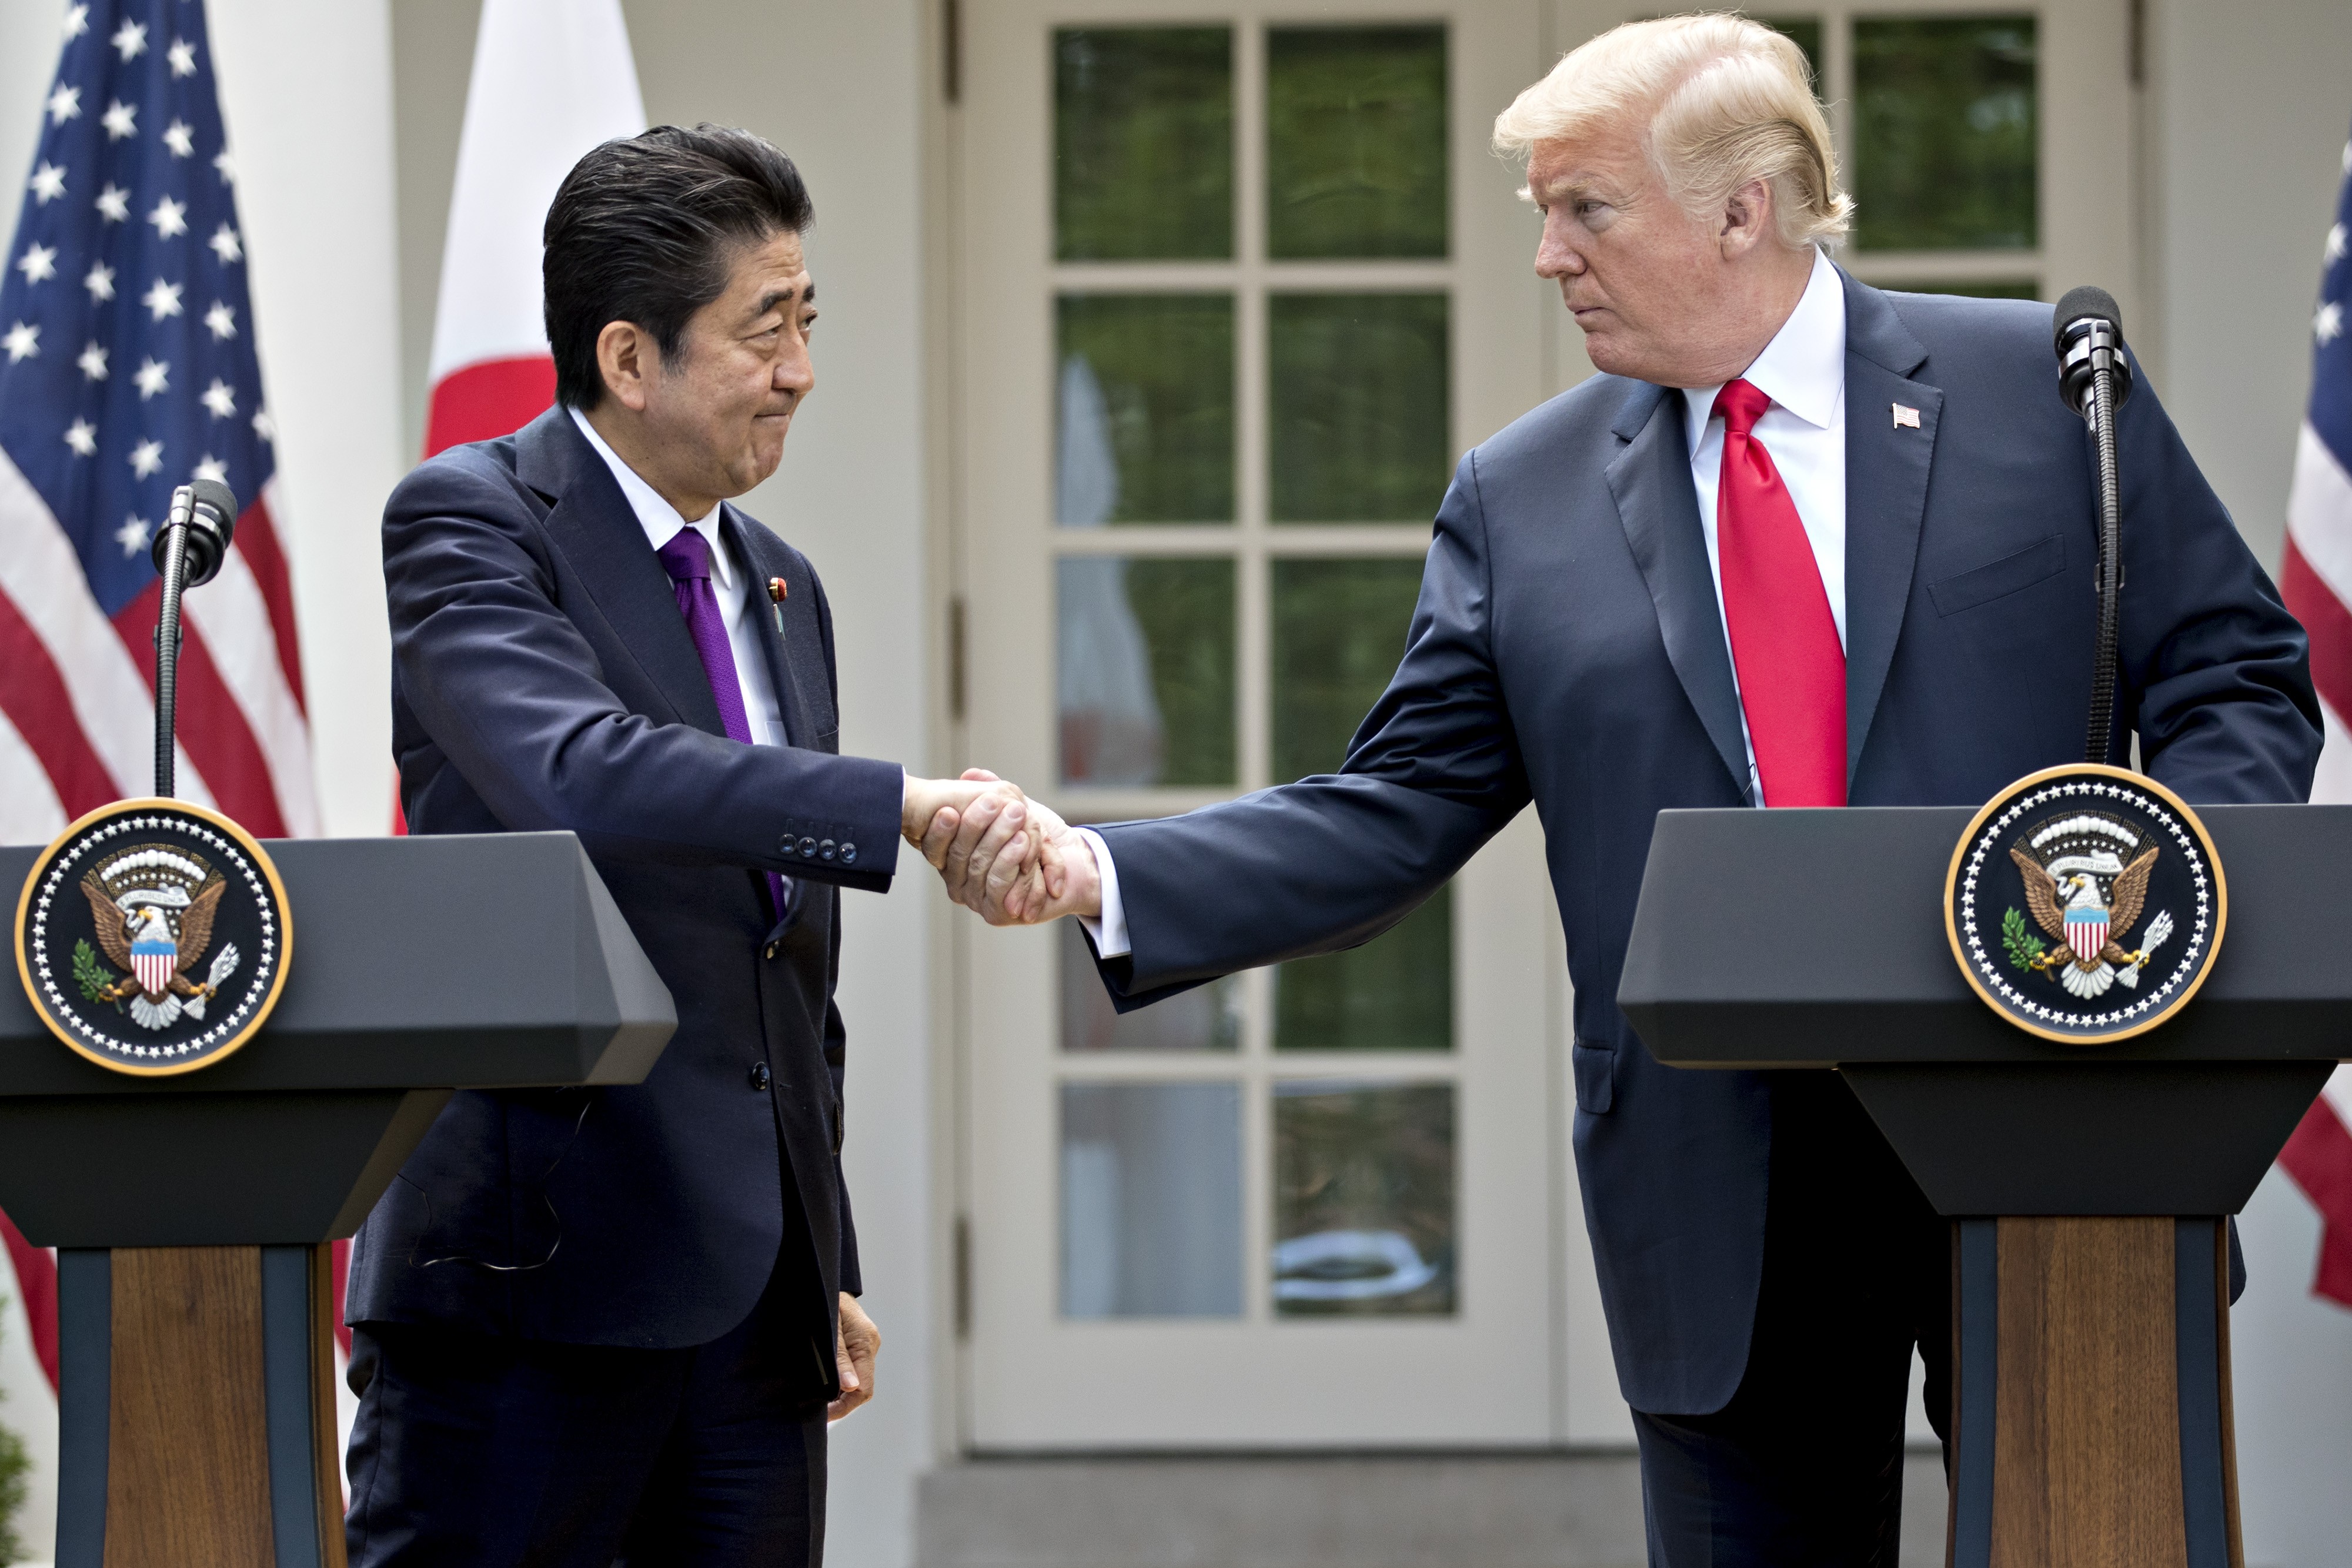 Shinzo Abe is poised to become Japan’s long serving prime minister on Thursday, a chance to fulfil his dream to revise the pacifist constitution. Yet Donald Trump’s trade war and slowing demand may get in the way, writes William Pesek.